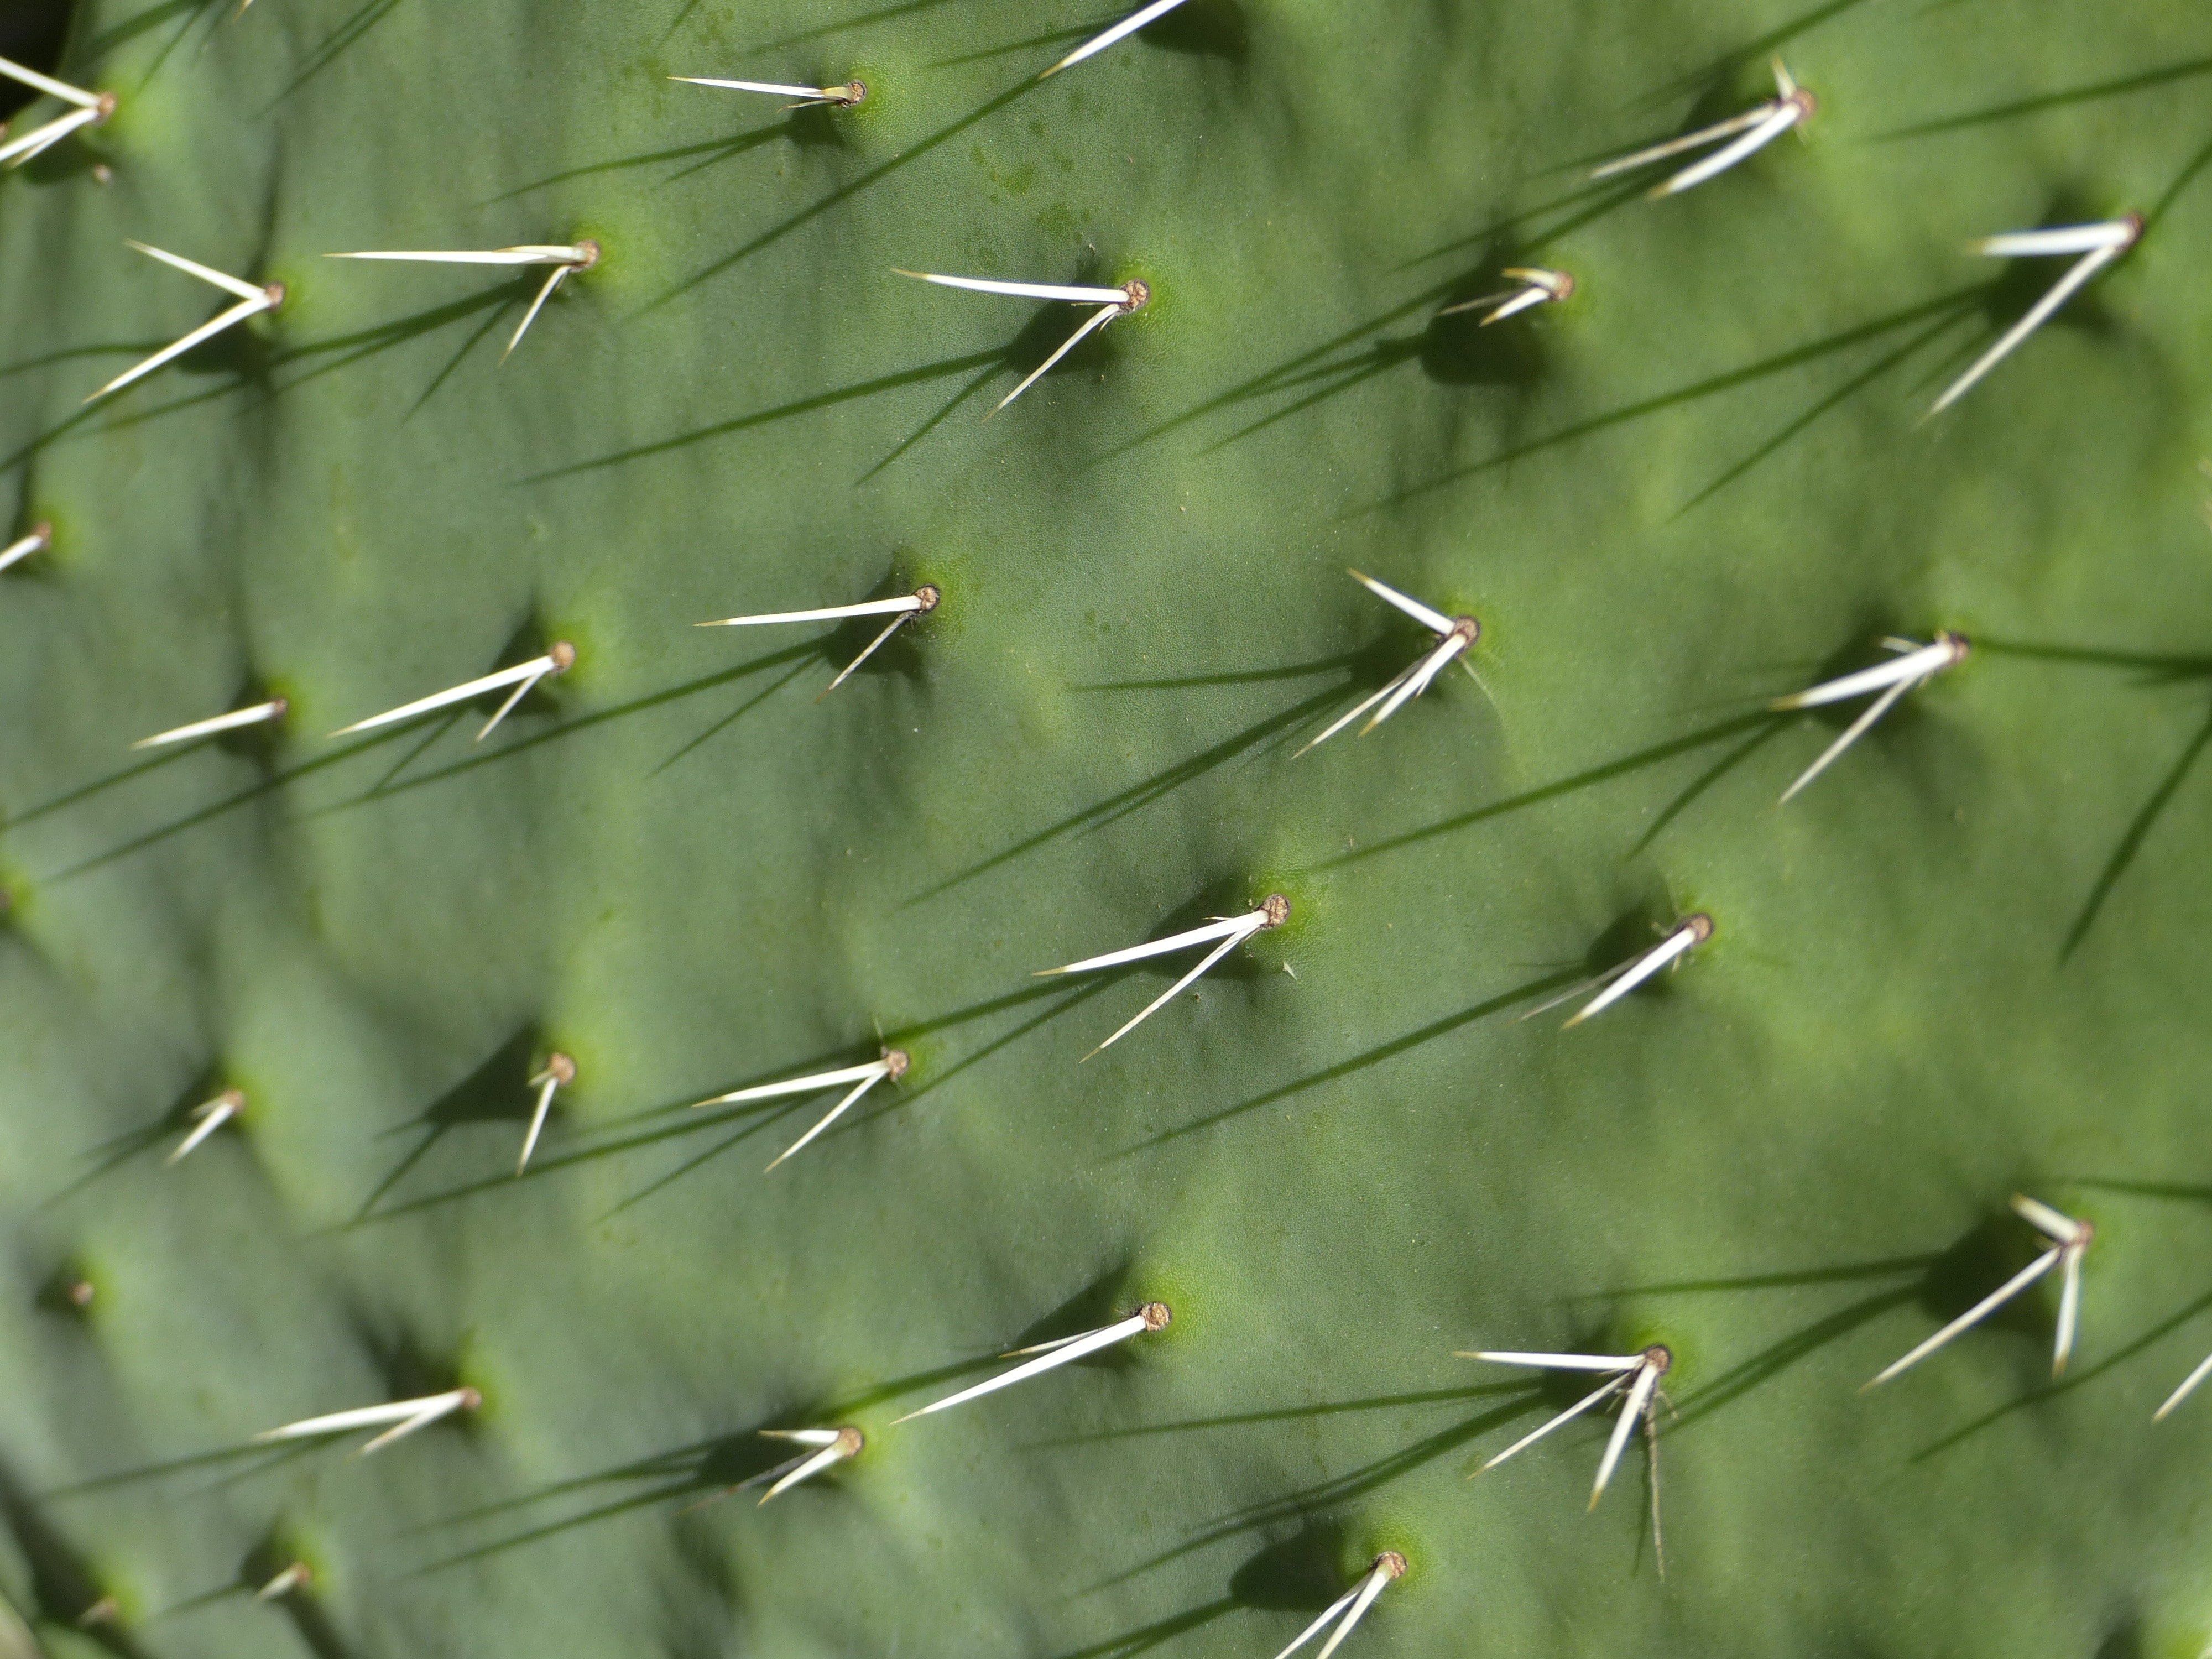 Succulent Plant, Cactus, Thorns, Nature, green color, full frame